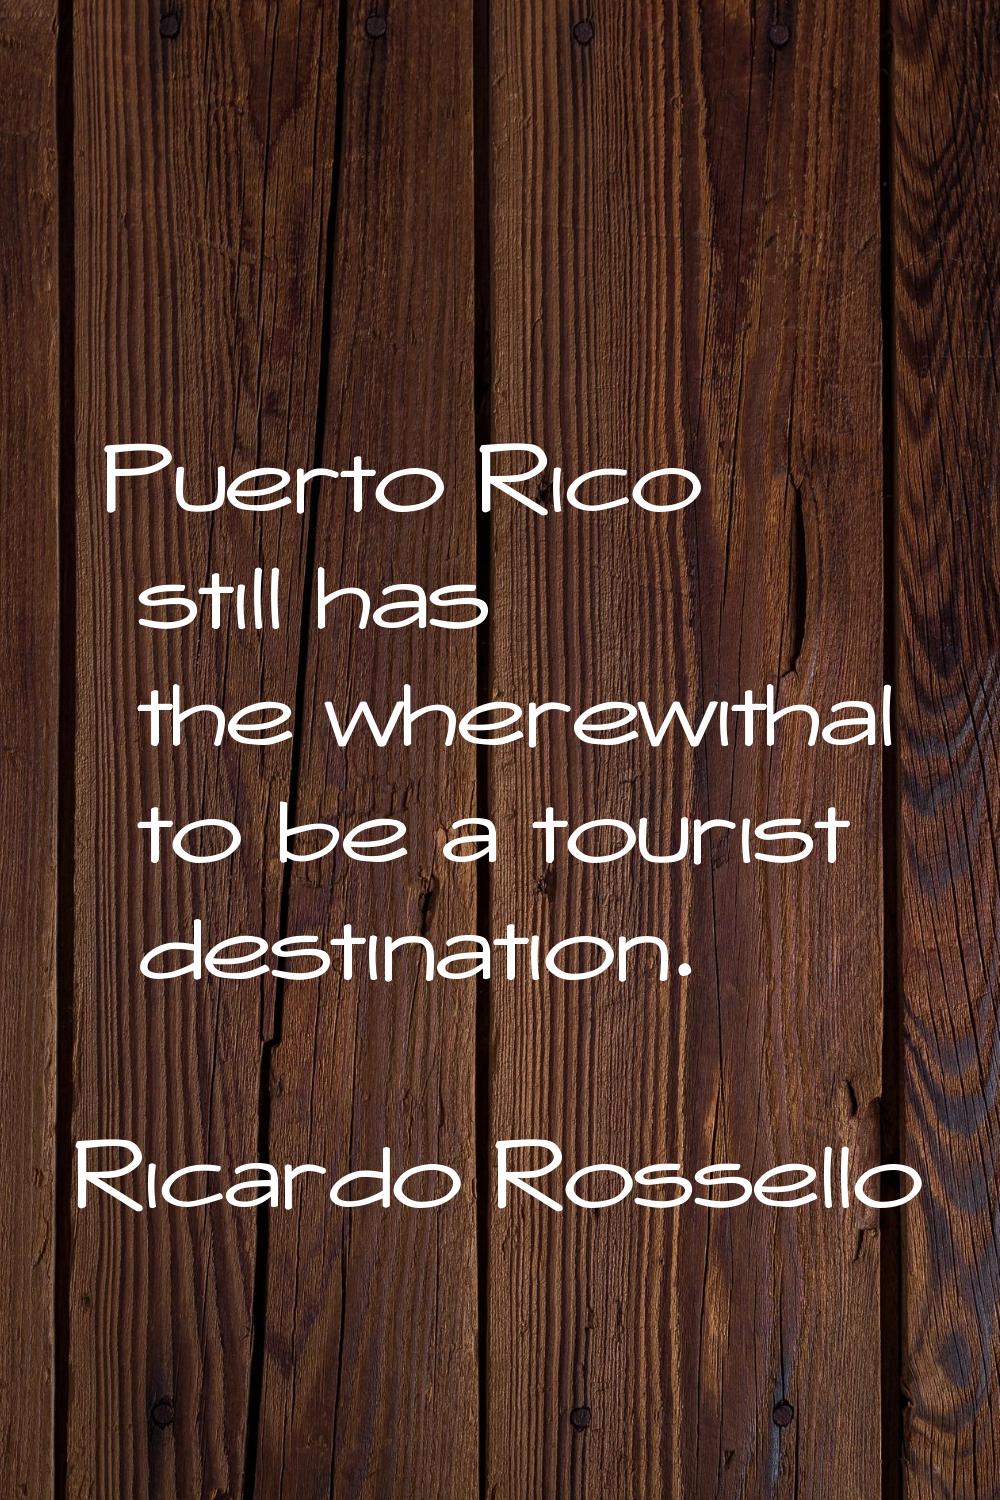 Puerto Rico still has the wherewithal to be a tourist destination.